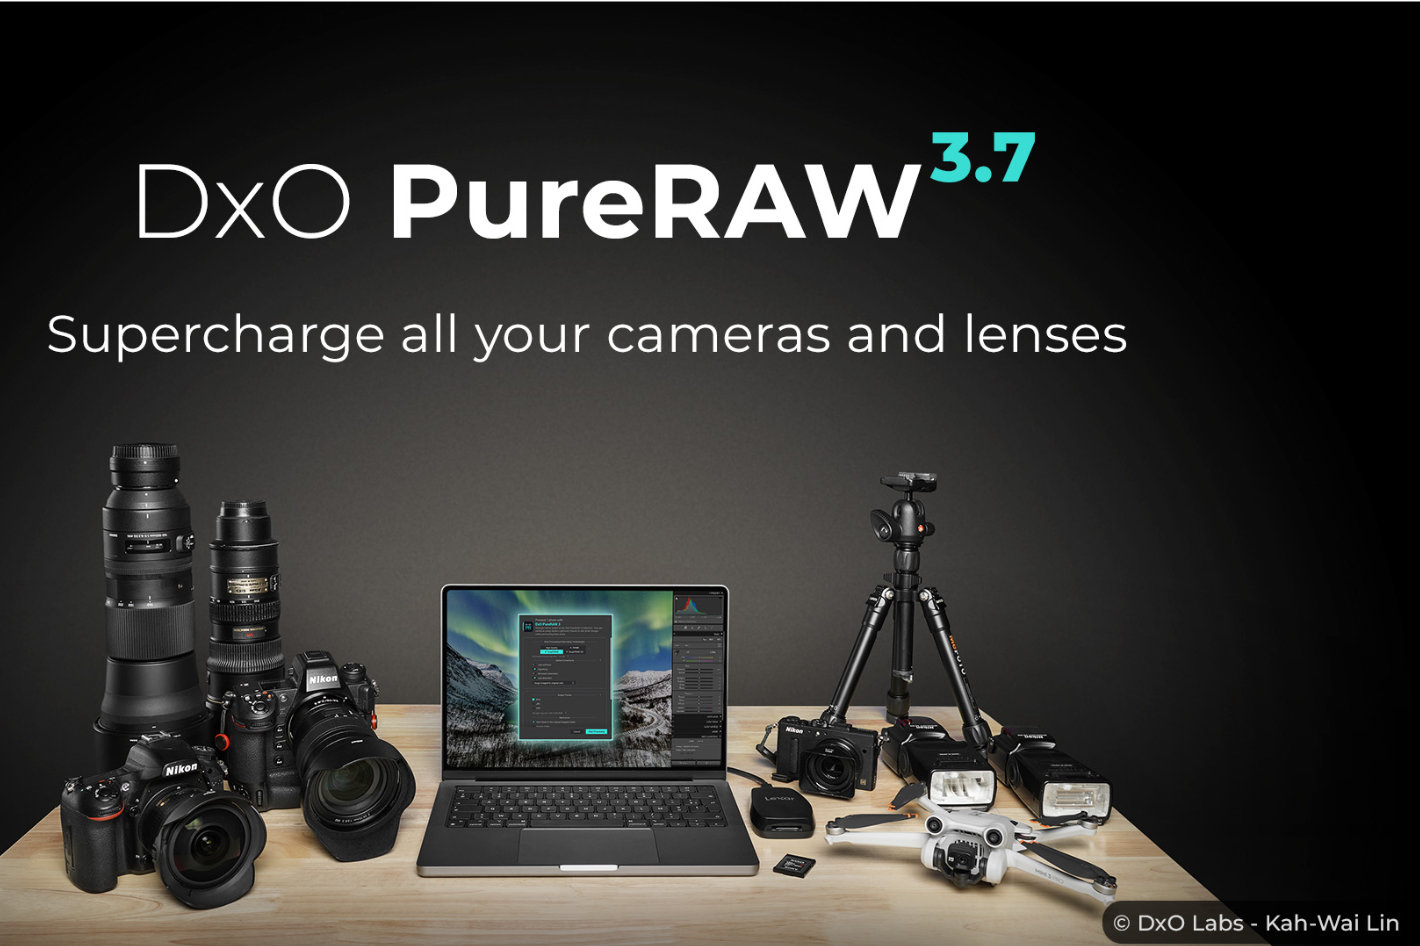 DxO PureRAW 3.7 now manages Lightroom Collections directly